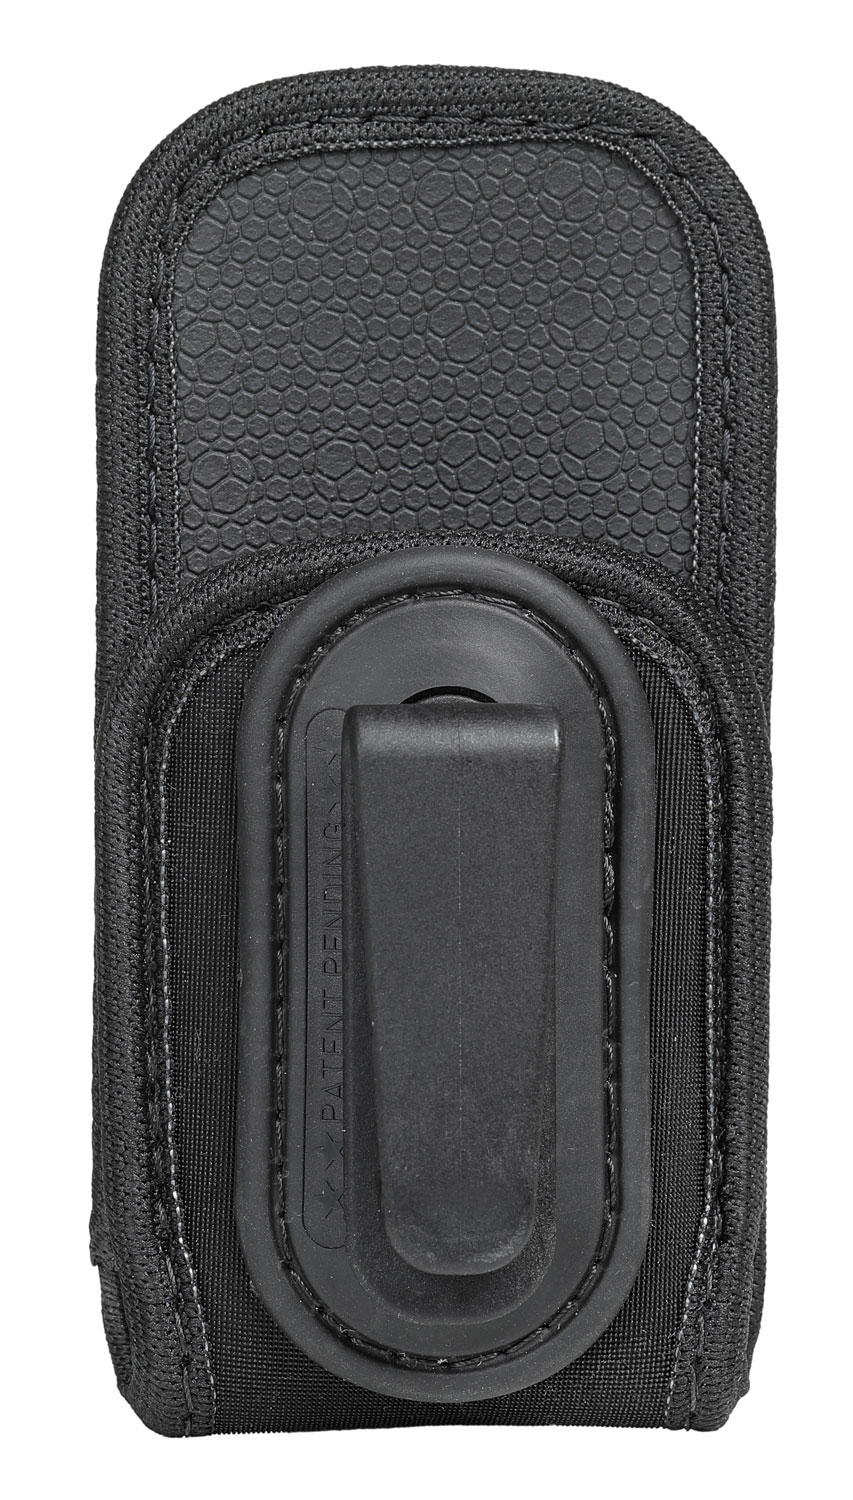 Alien Gear Holsters GMSSM Grip Tuck Mag Carrier IWB Style made of Neoprene with Black Finish & Belt Clip compatible with Medium Length Single Stack Mags (Medium Length = 4.62